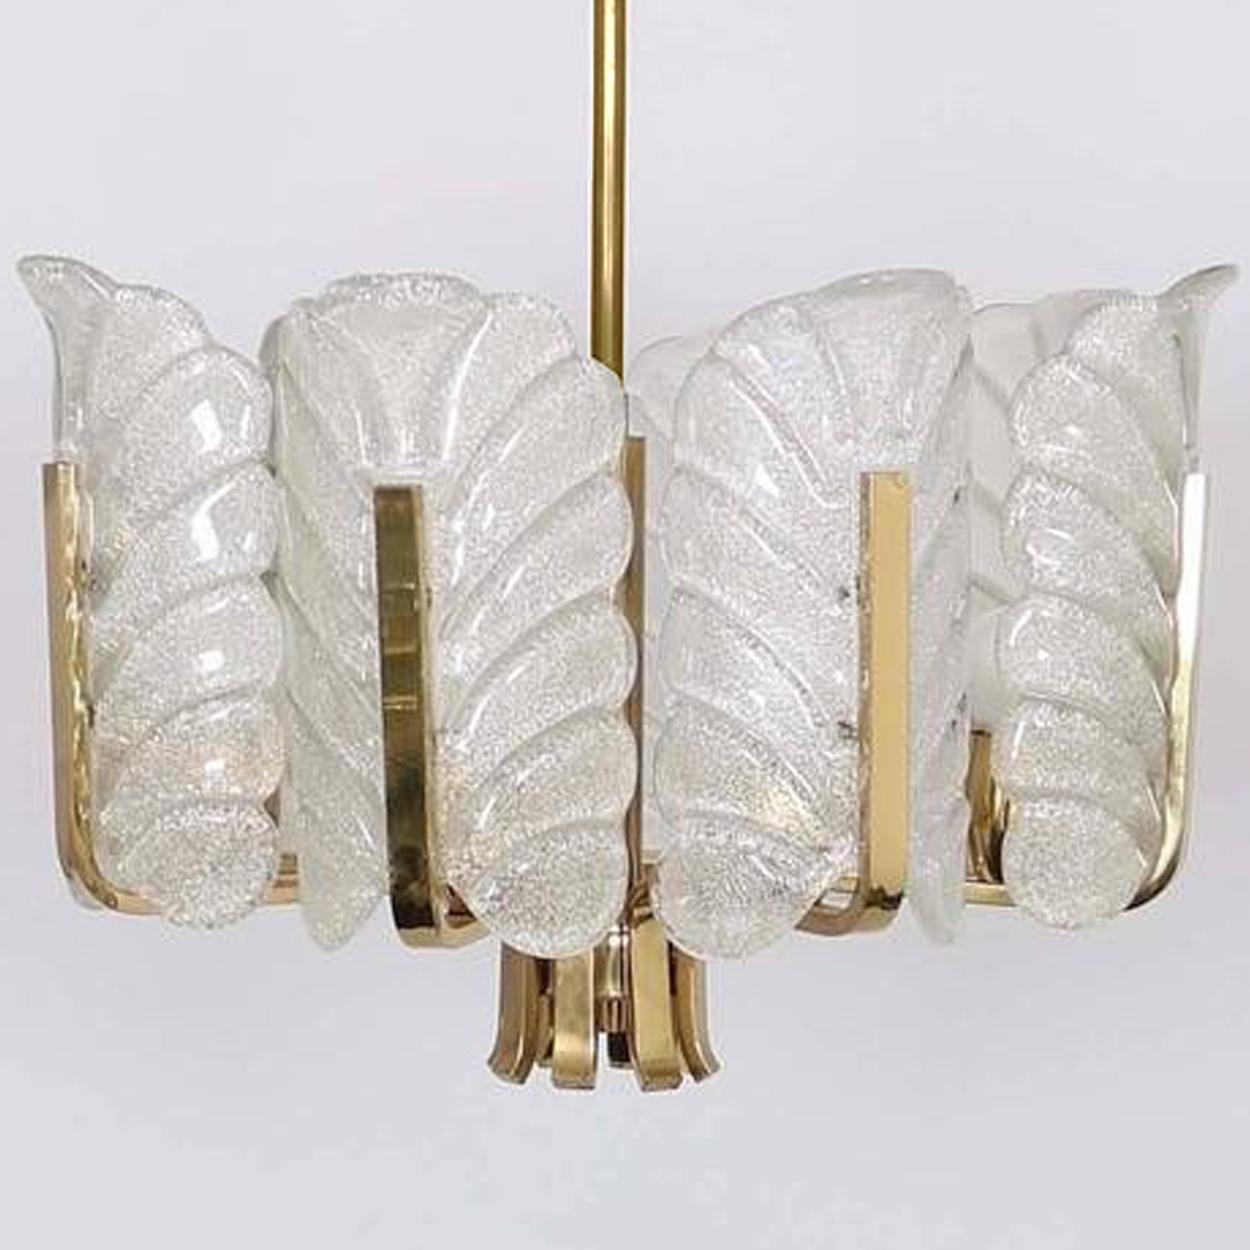 One of the Six Large Fagerlund Glass Leaves Brass Chandelier by Orrefors, 1960s For Sale 2